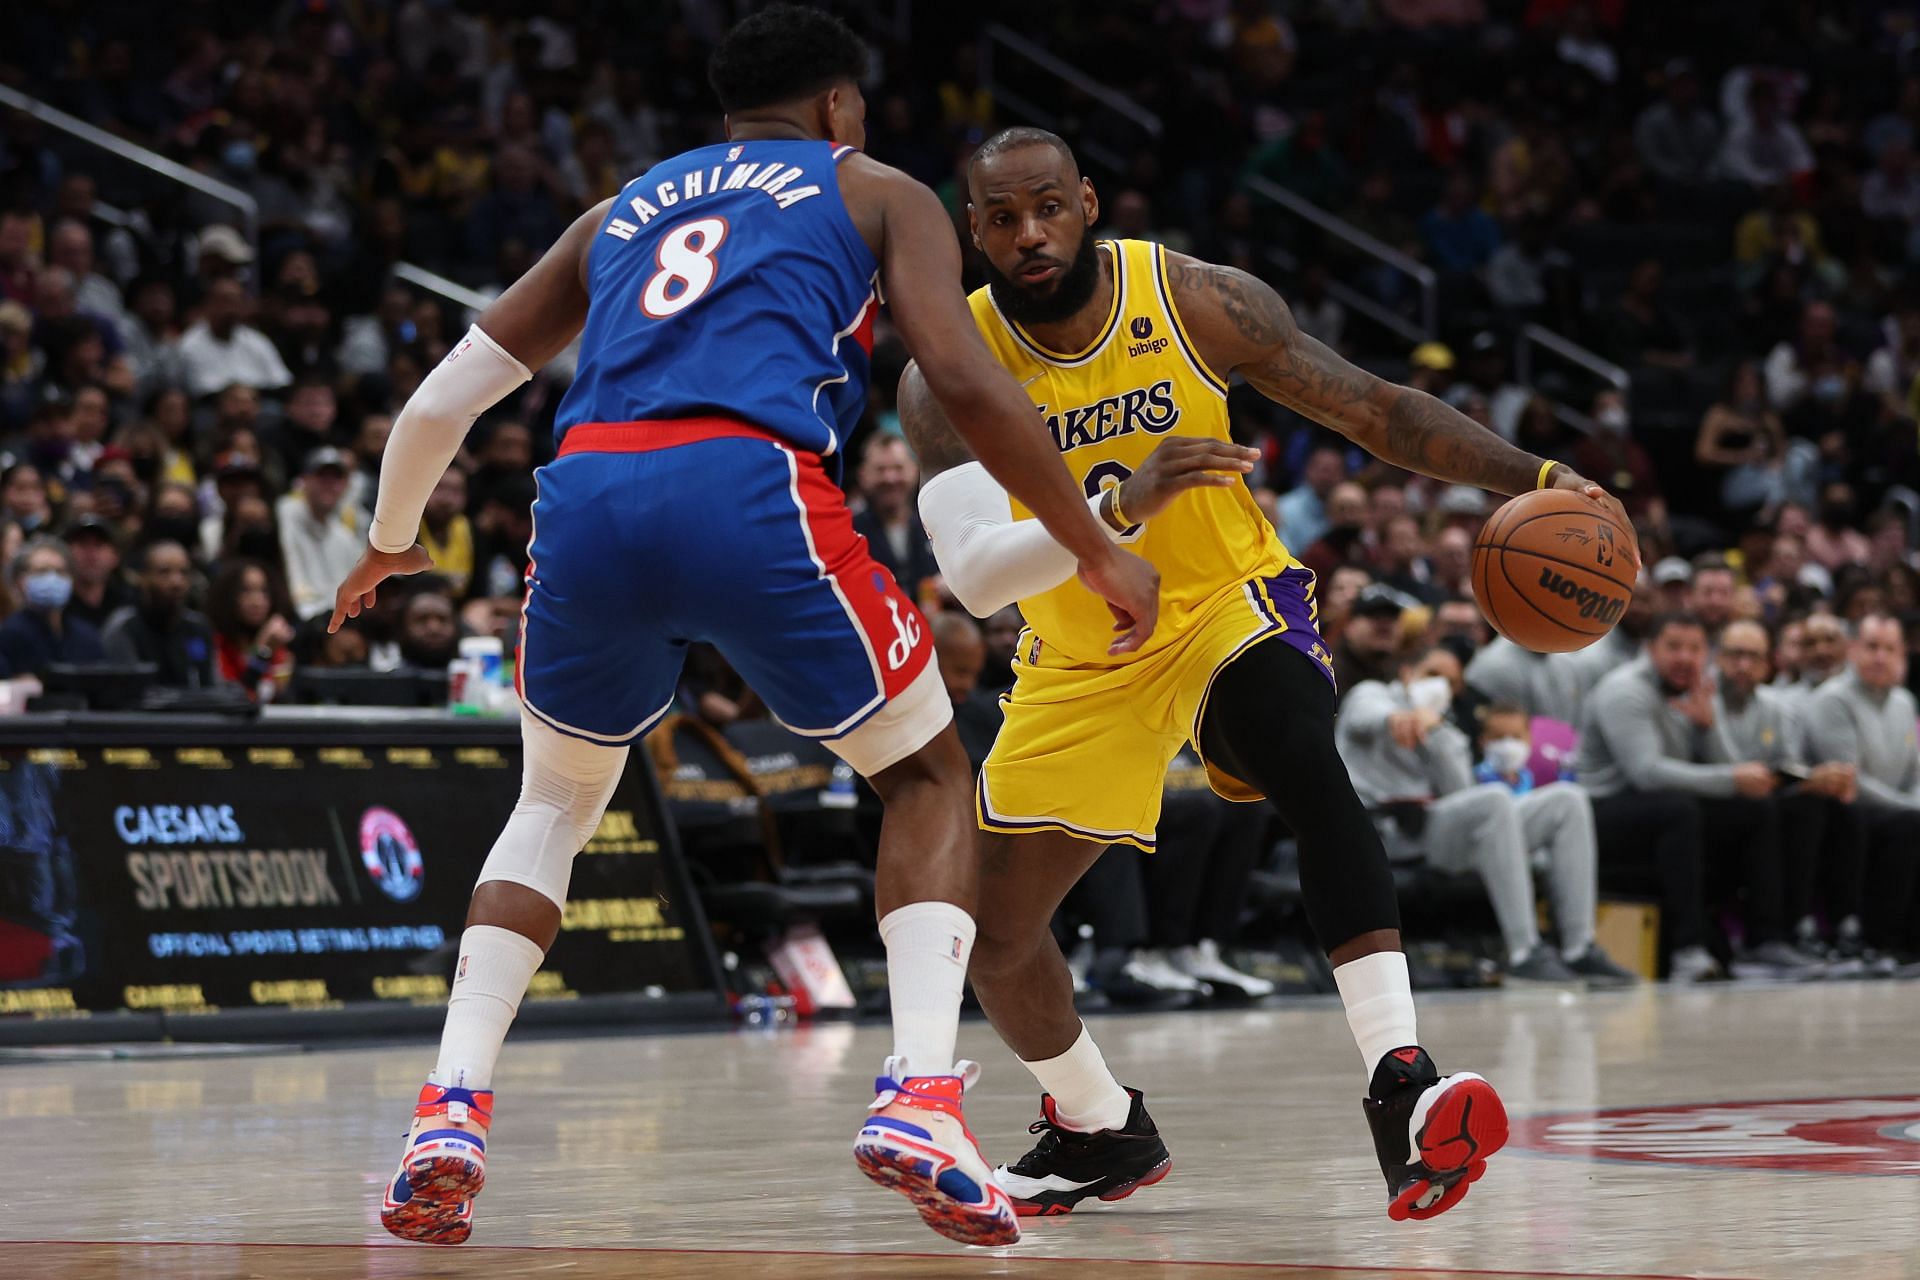 LeBron James of the LA Lakers in action against the Washington Wizards